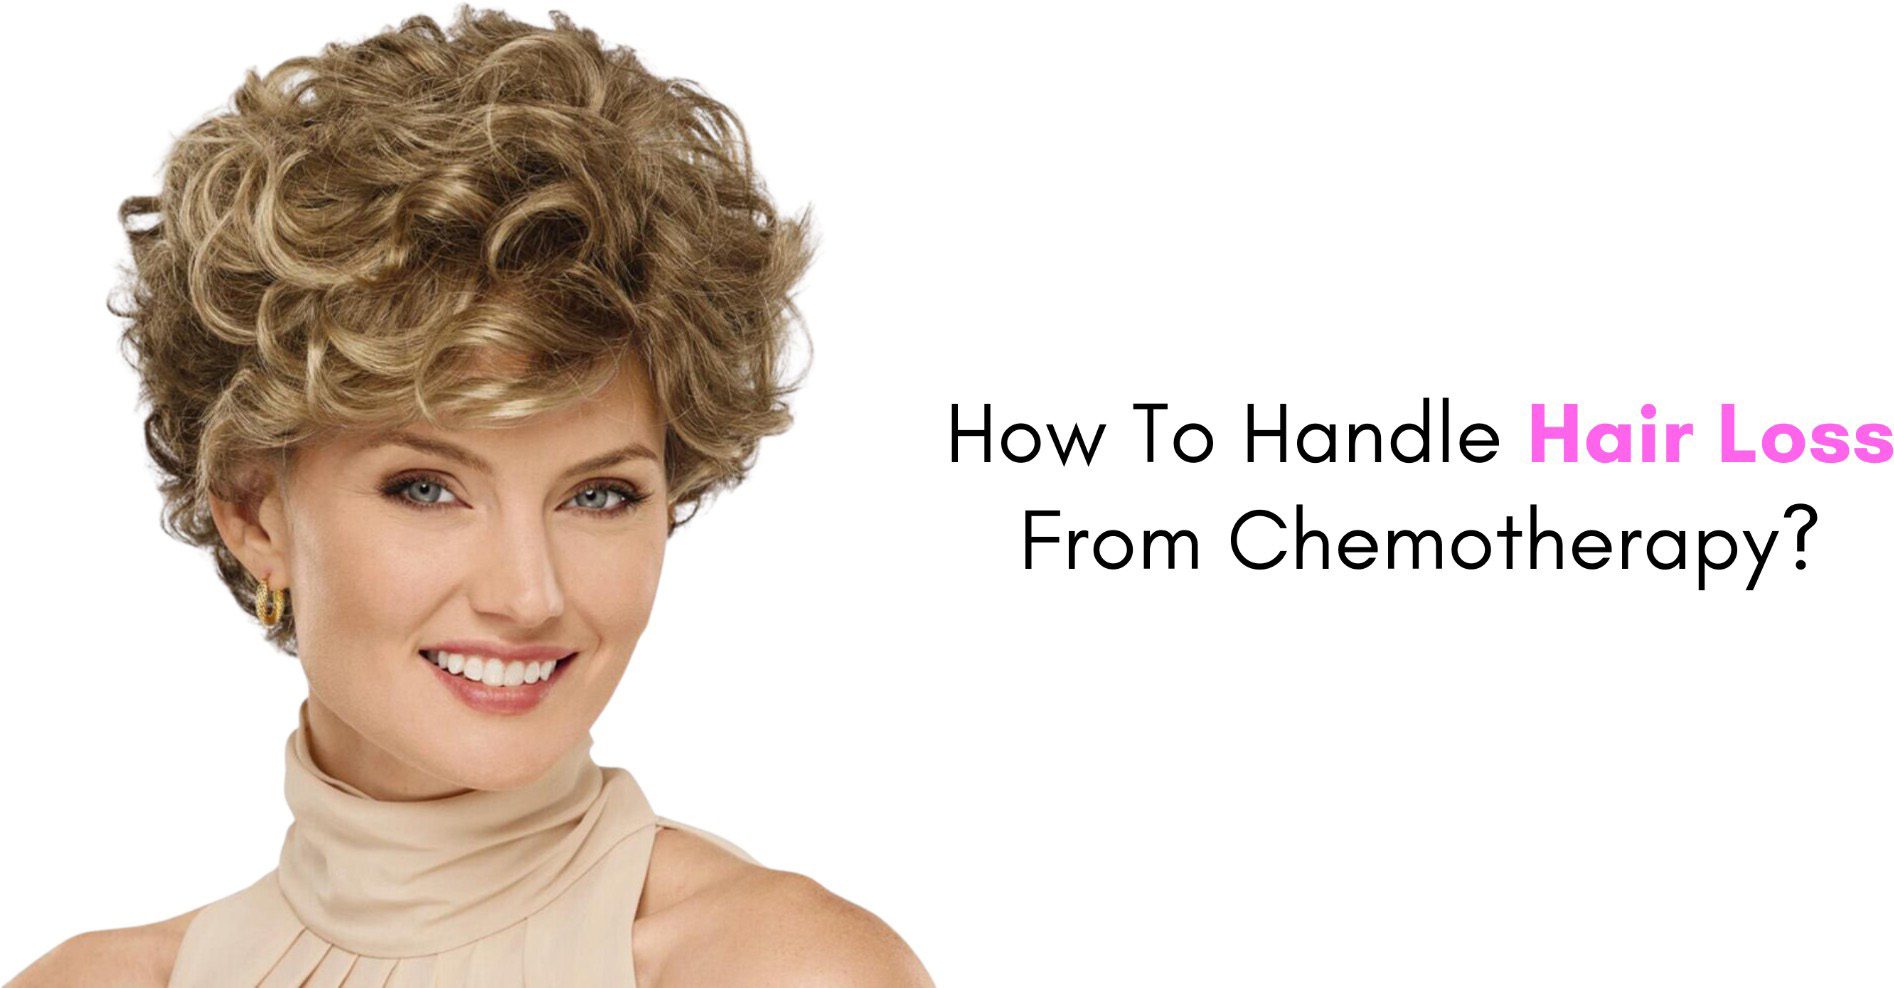 How To Handle Hair Loss From Chemotherapy?